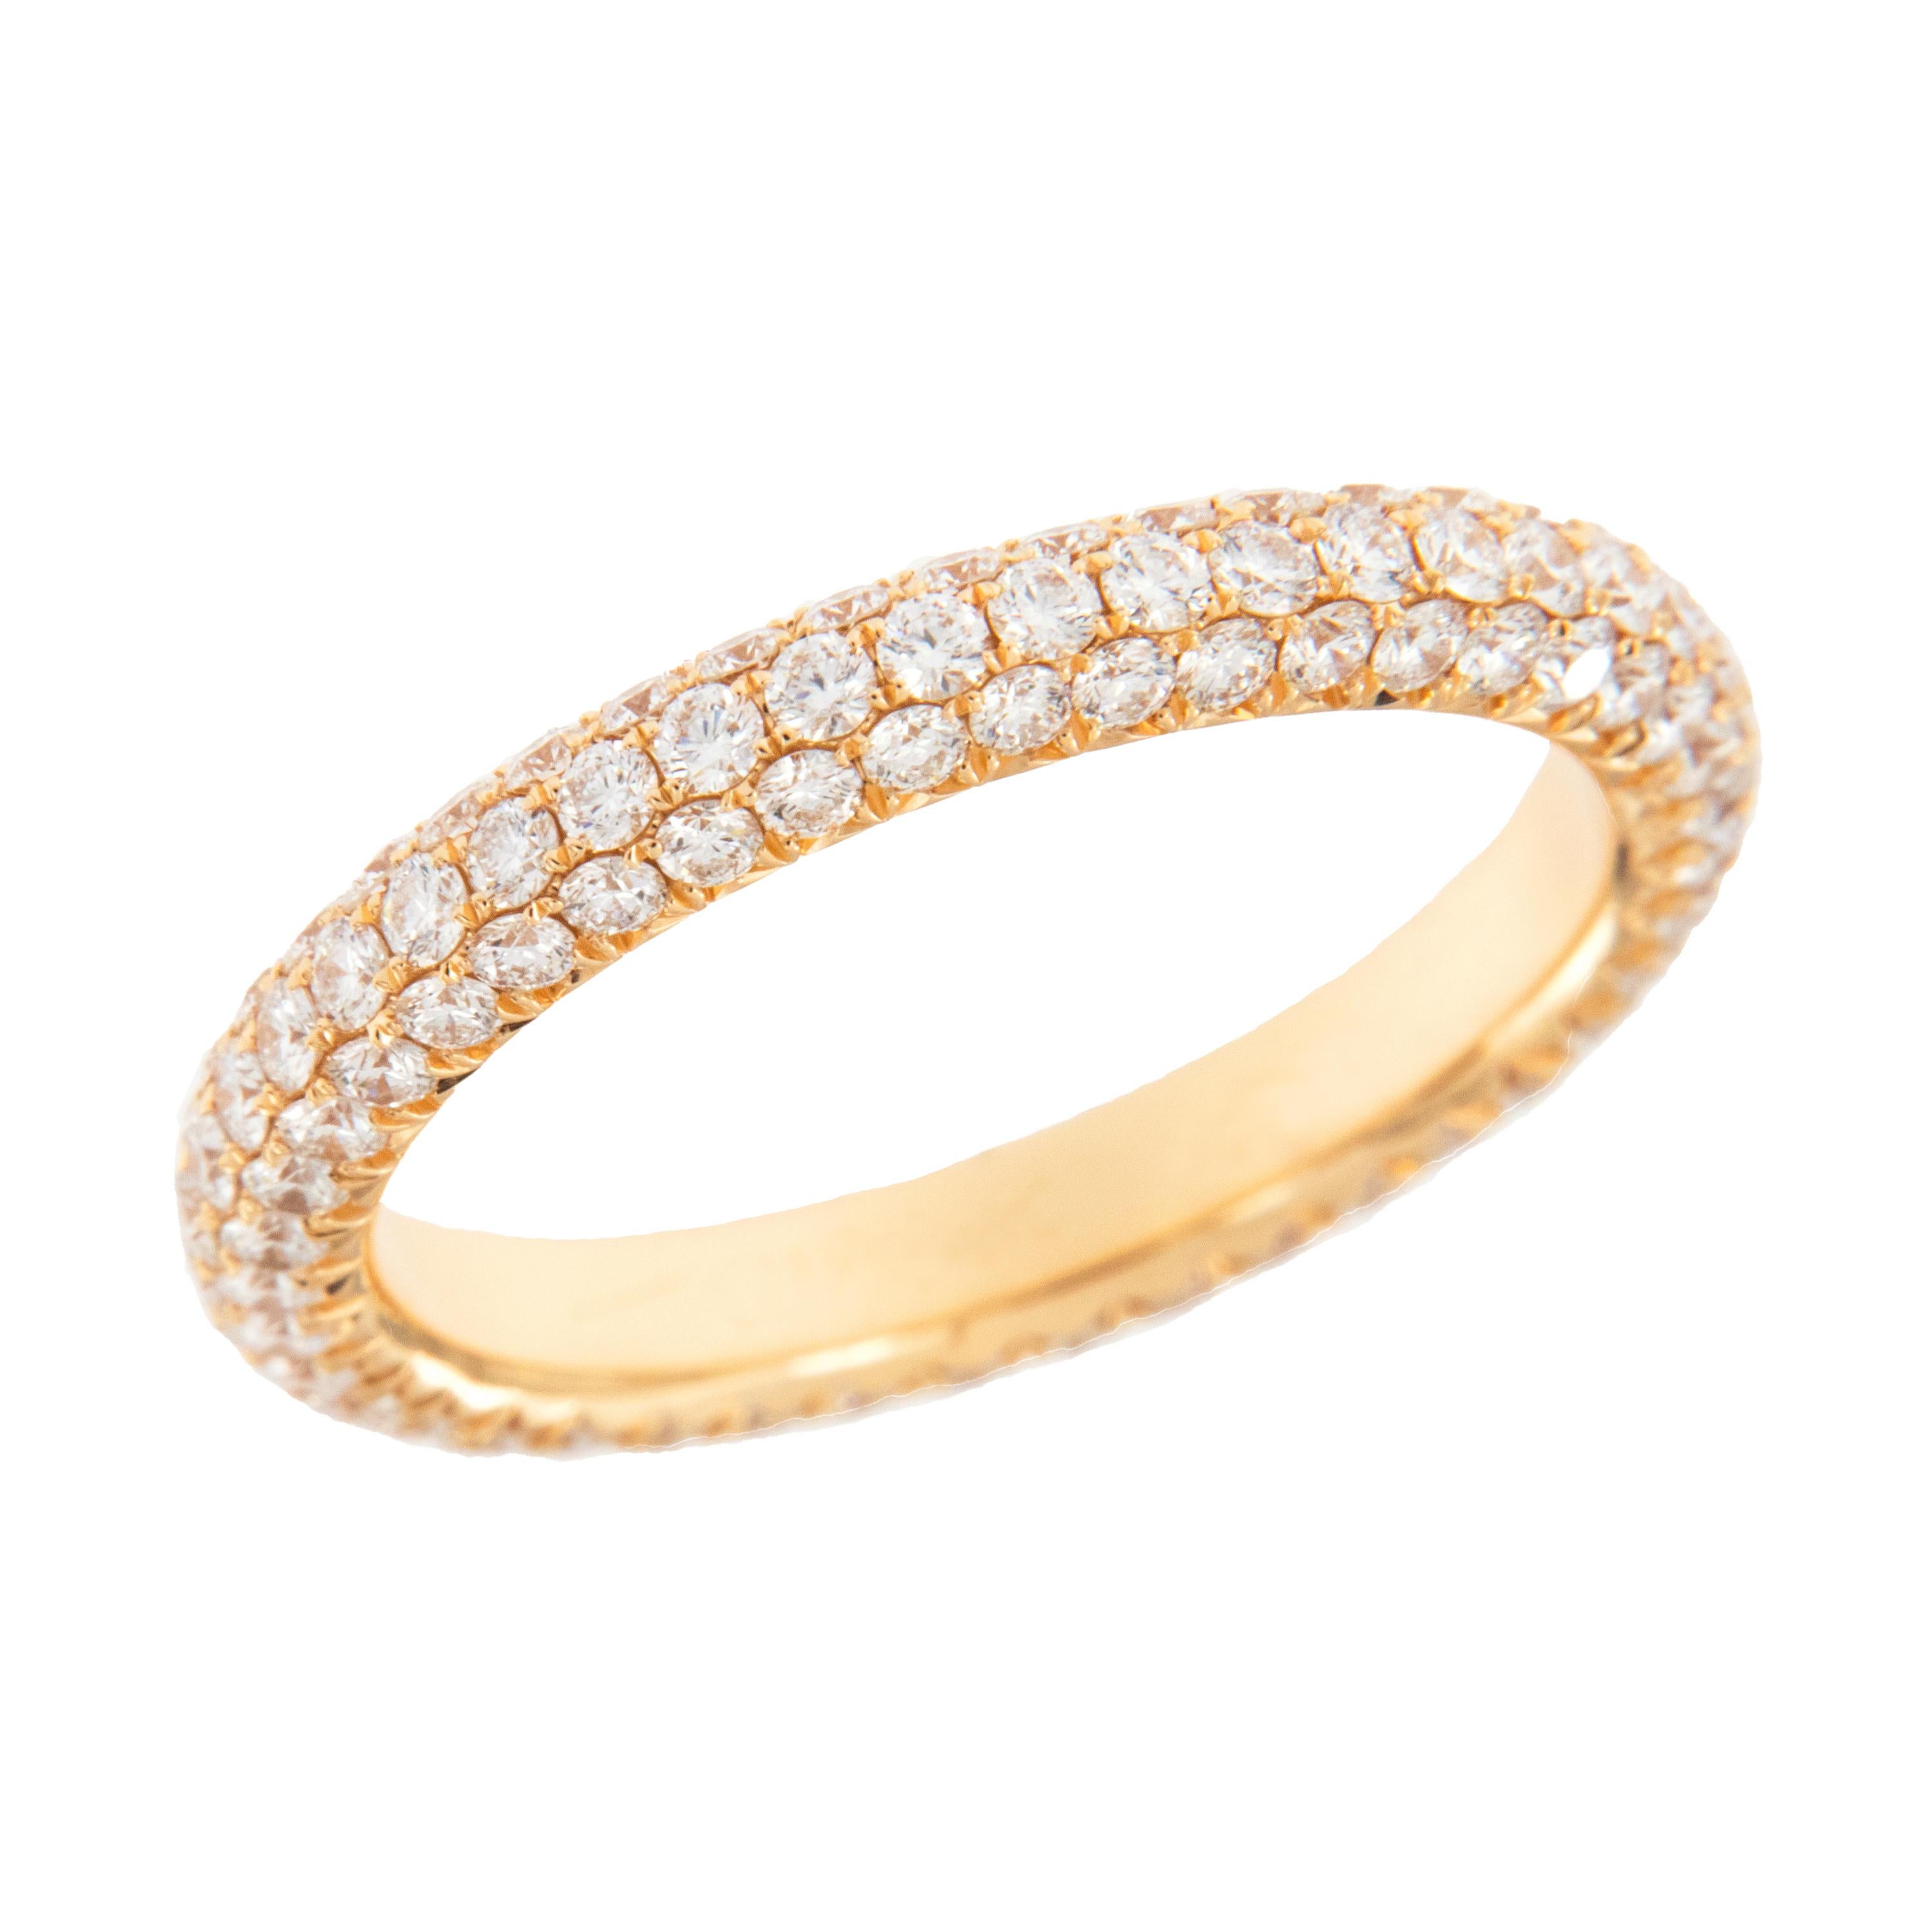 Expertly crafted eternity band by William Rosenberg made from 18 karat regal rose gold with 3 row pave' set round brilliant diamonds = 1.51 Cttw. These exceptional diamonds are of VS clarity & D-F color. This ring was made in a size 6 but can be